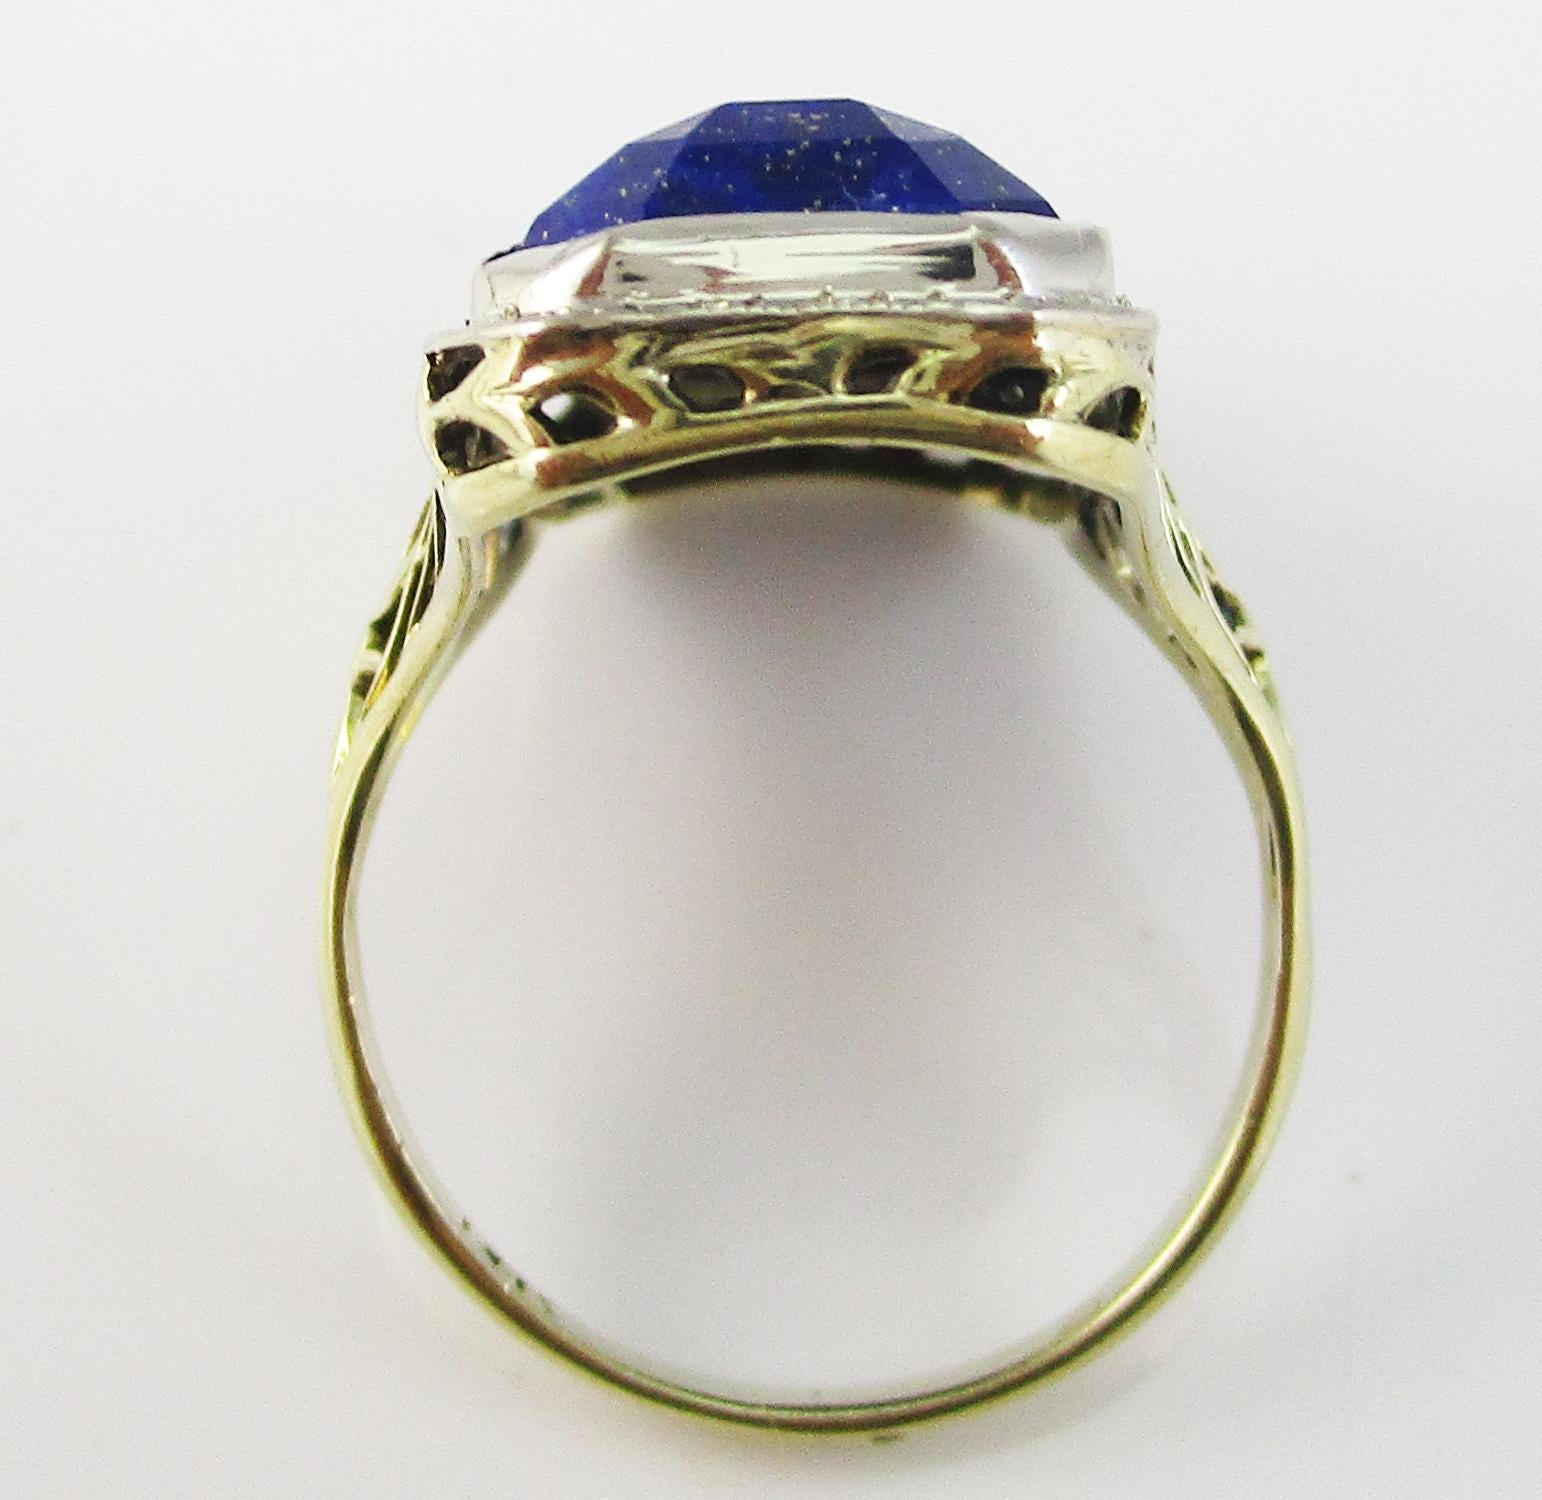 Edwardian 14K White and Green Gold Filigree Faceted Blue Lapis Statement Ring 2